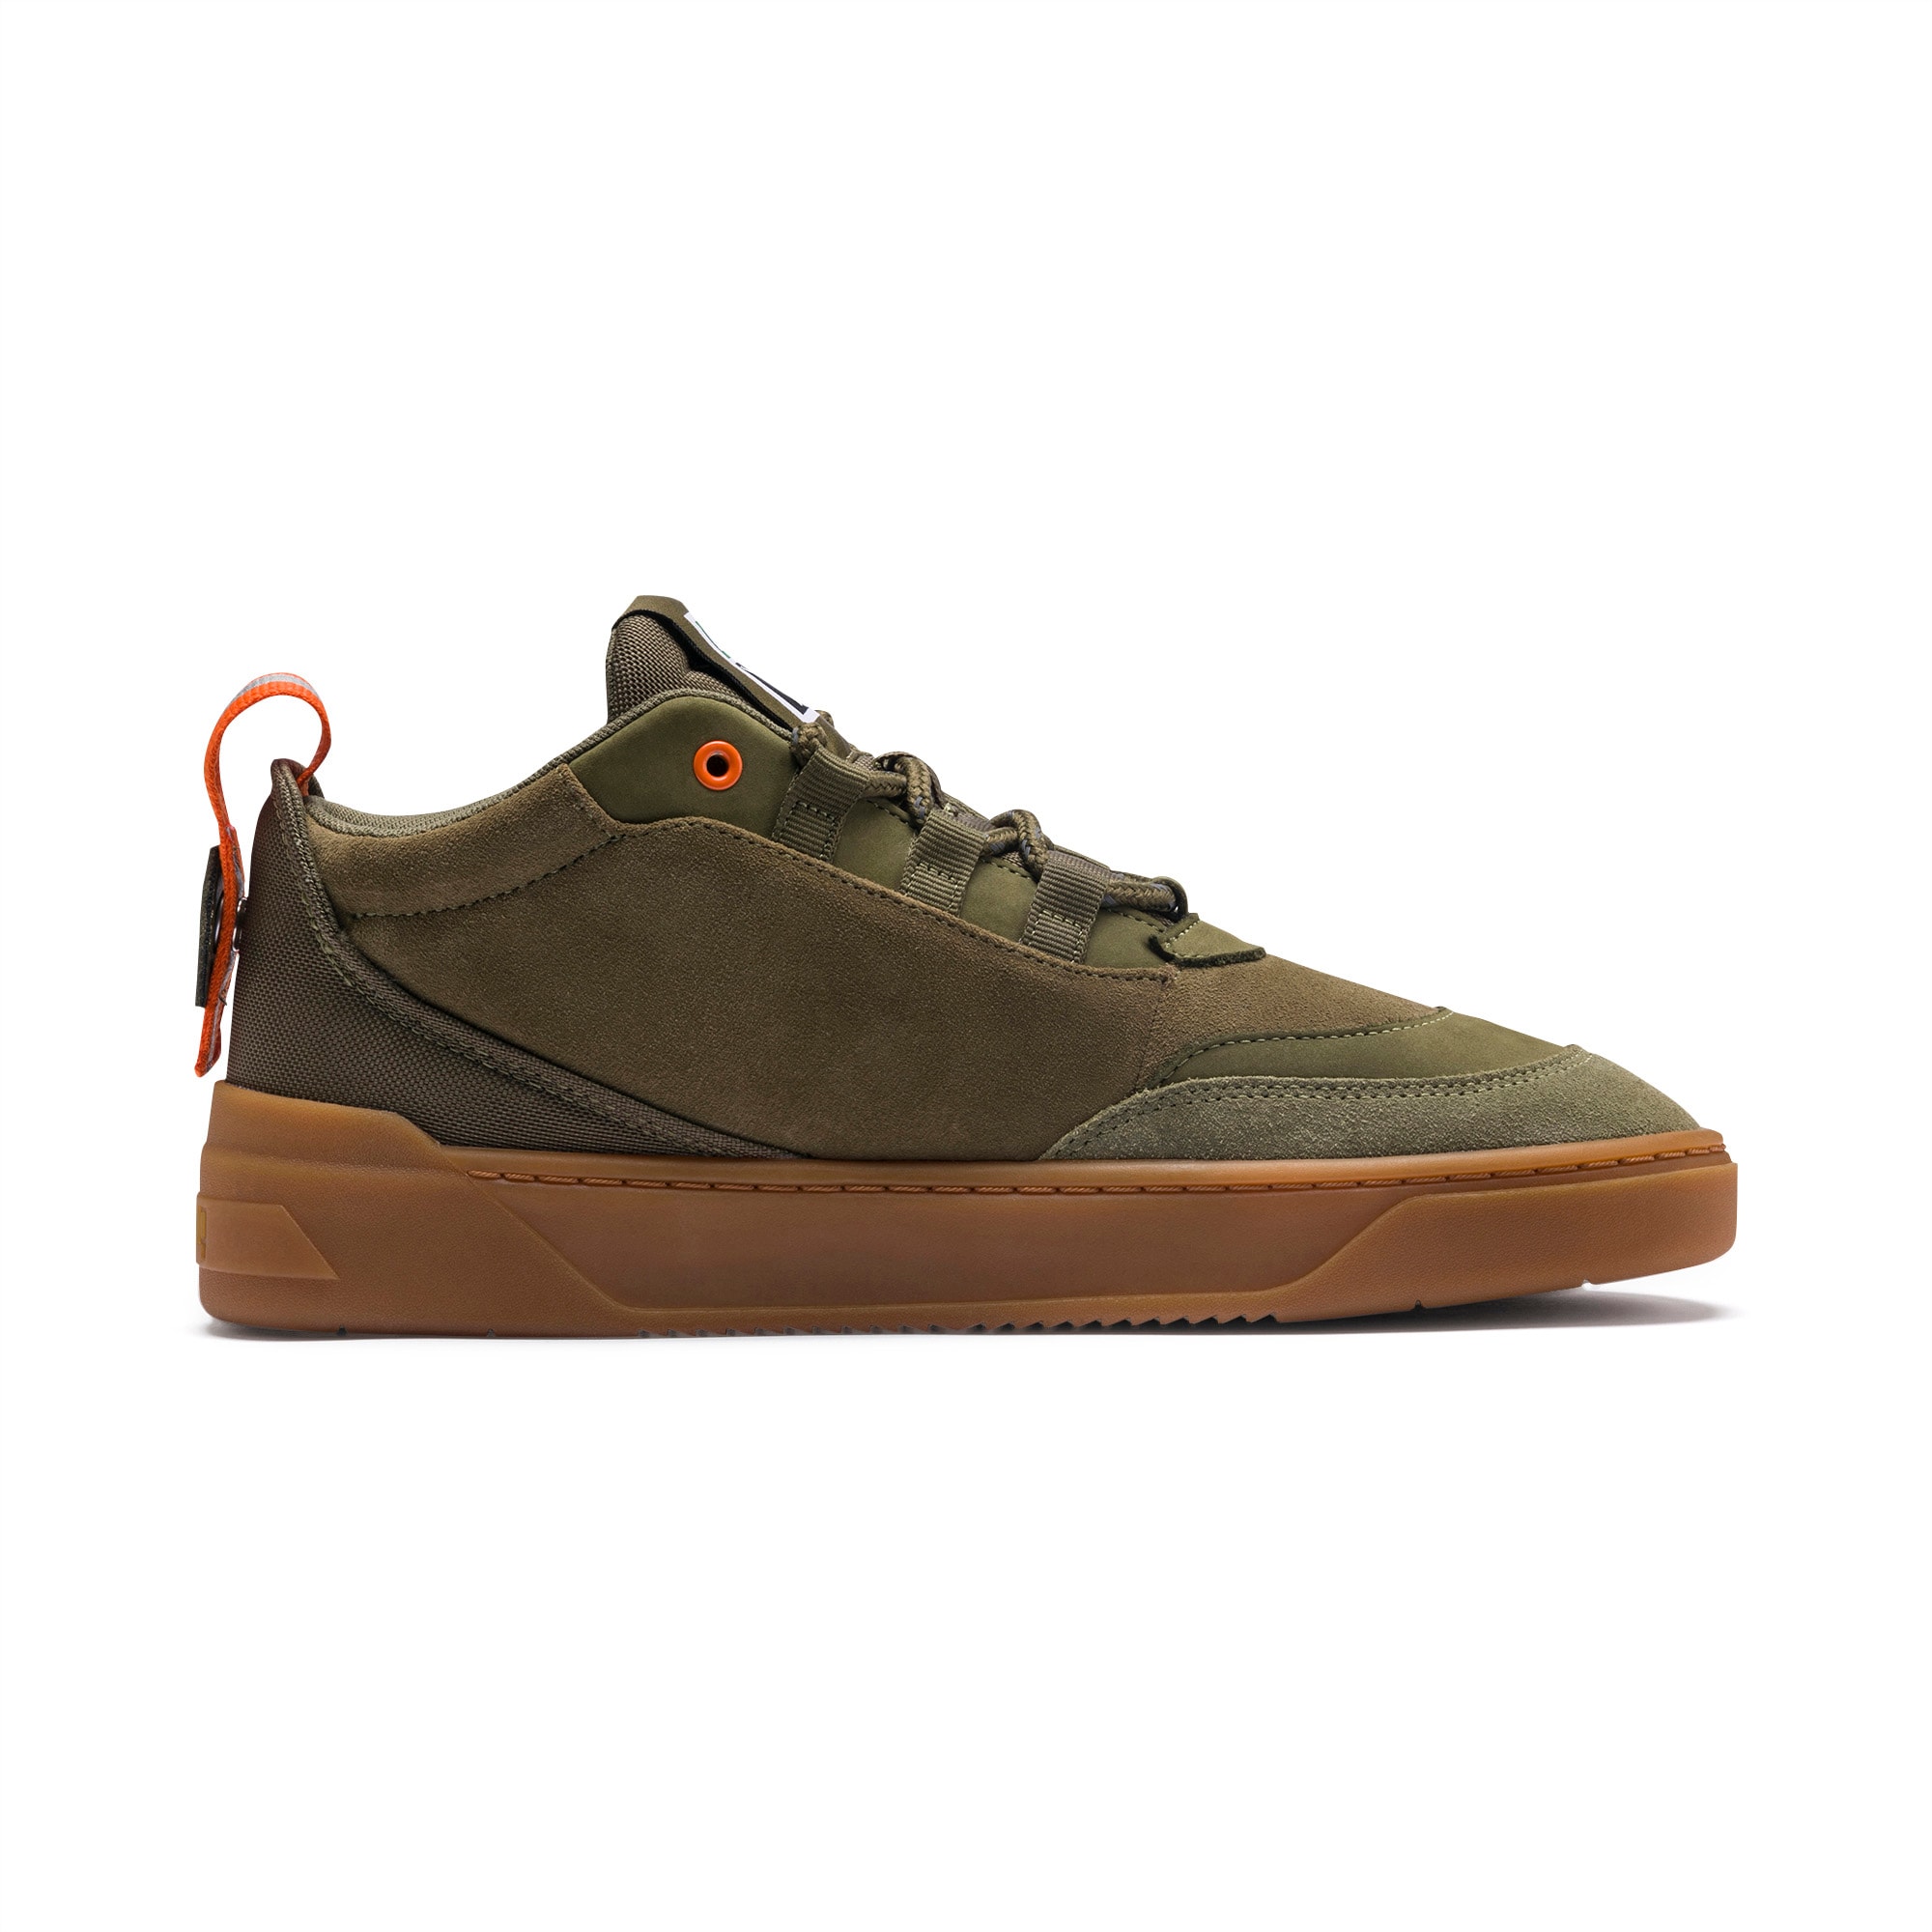 puma sneakers army green